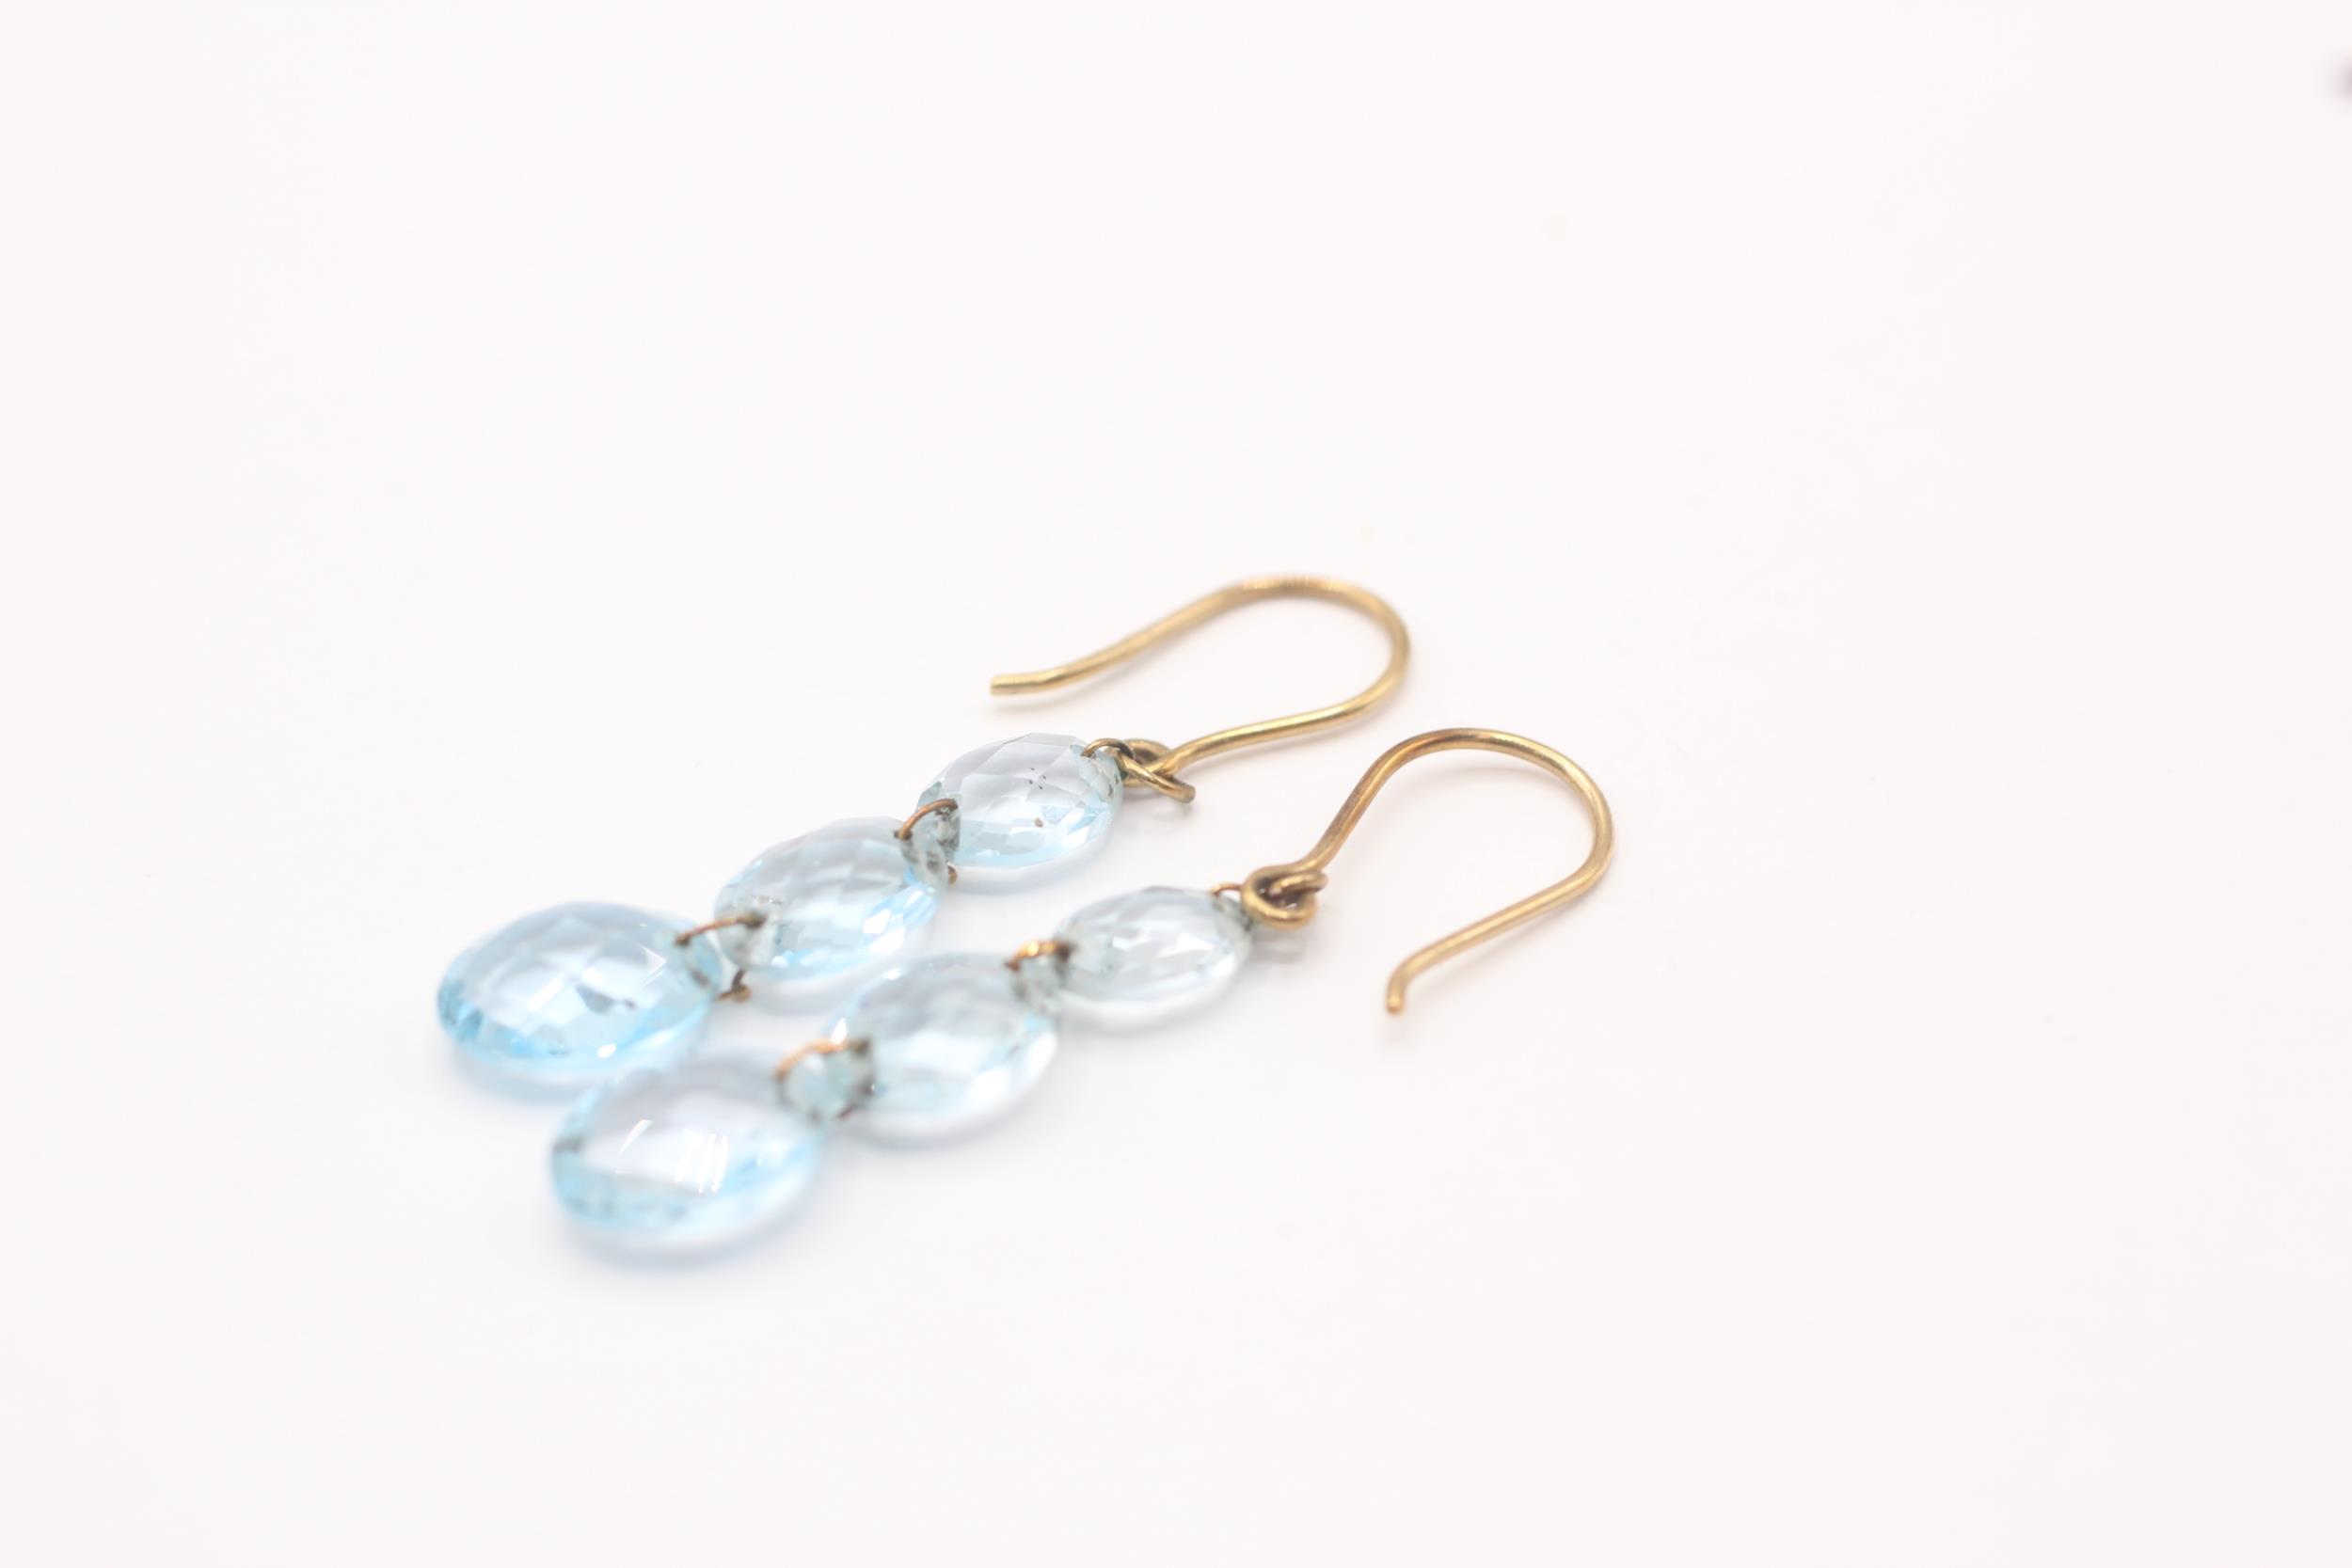 9ct gold faceted blue topaz drop earrings with French hooks 2.1 g - Image 4 of 5